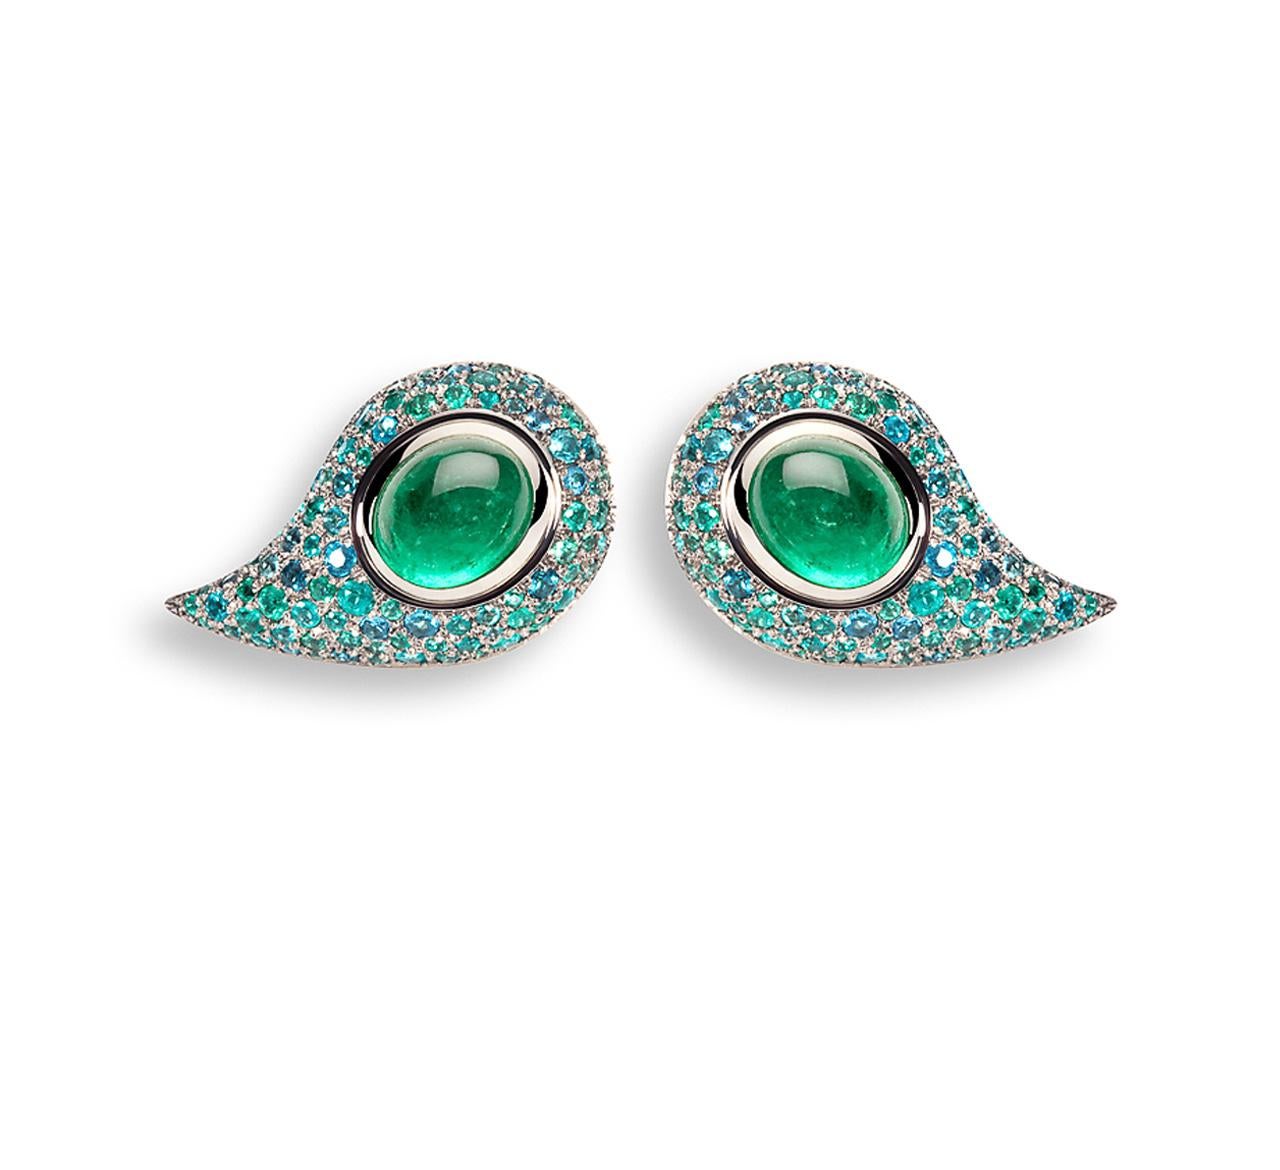 Stunning Studs with 2 Emeralds 8.34 Carat and very rare Brazilian Paraiba Tourmaline 4.56 Carat. The earrings are unique. 18 Carat White Gold 

They are handmade by Colleen B. Raosenblat.
